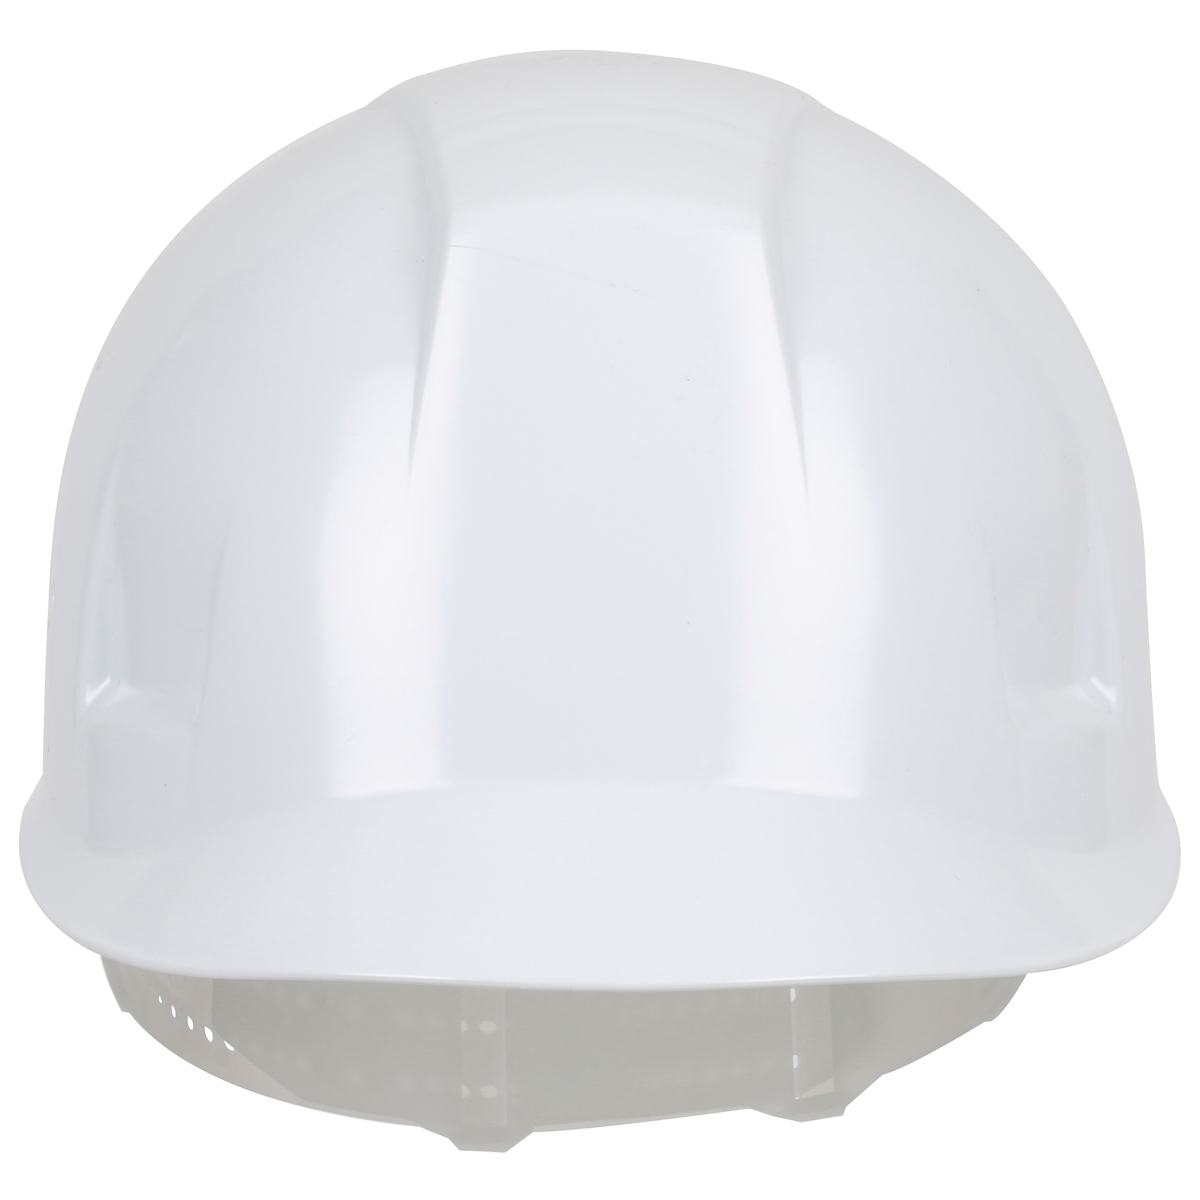 280-HP940 PIP® 4-Point Plastic Suspension and Pin-Lock Adjustable Back Bump Caps